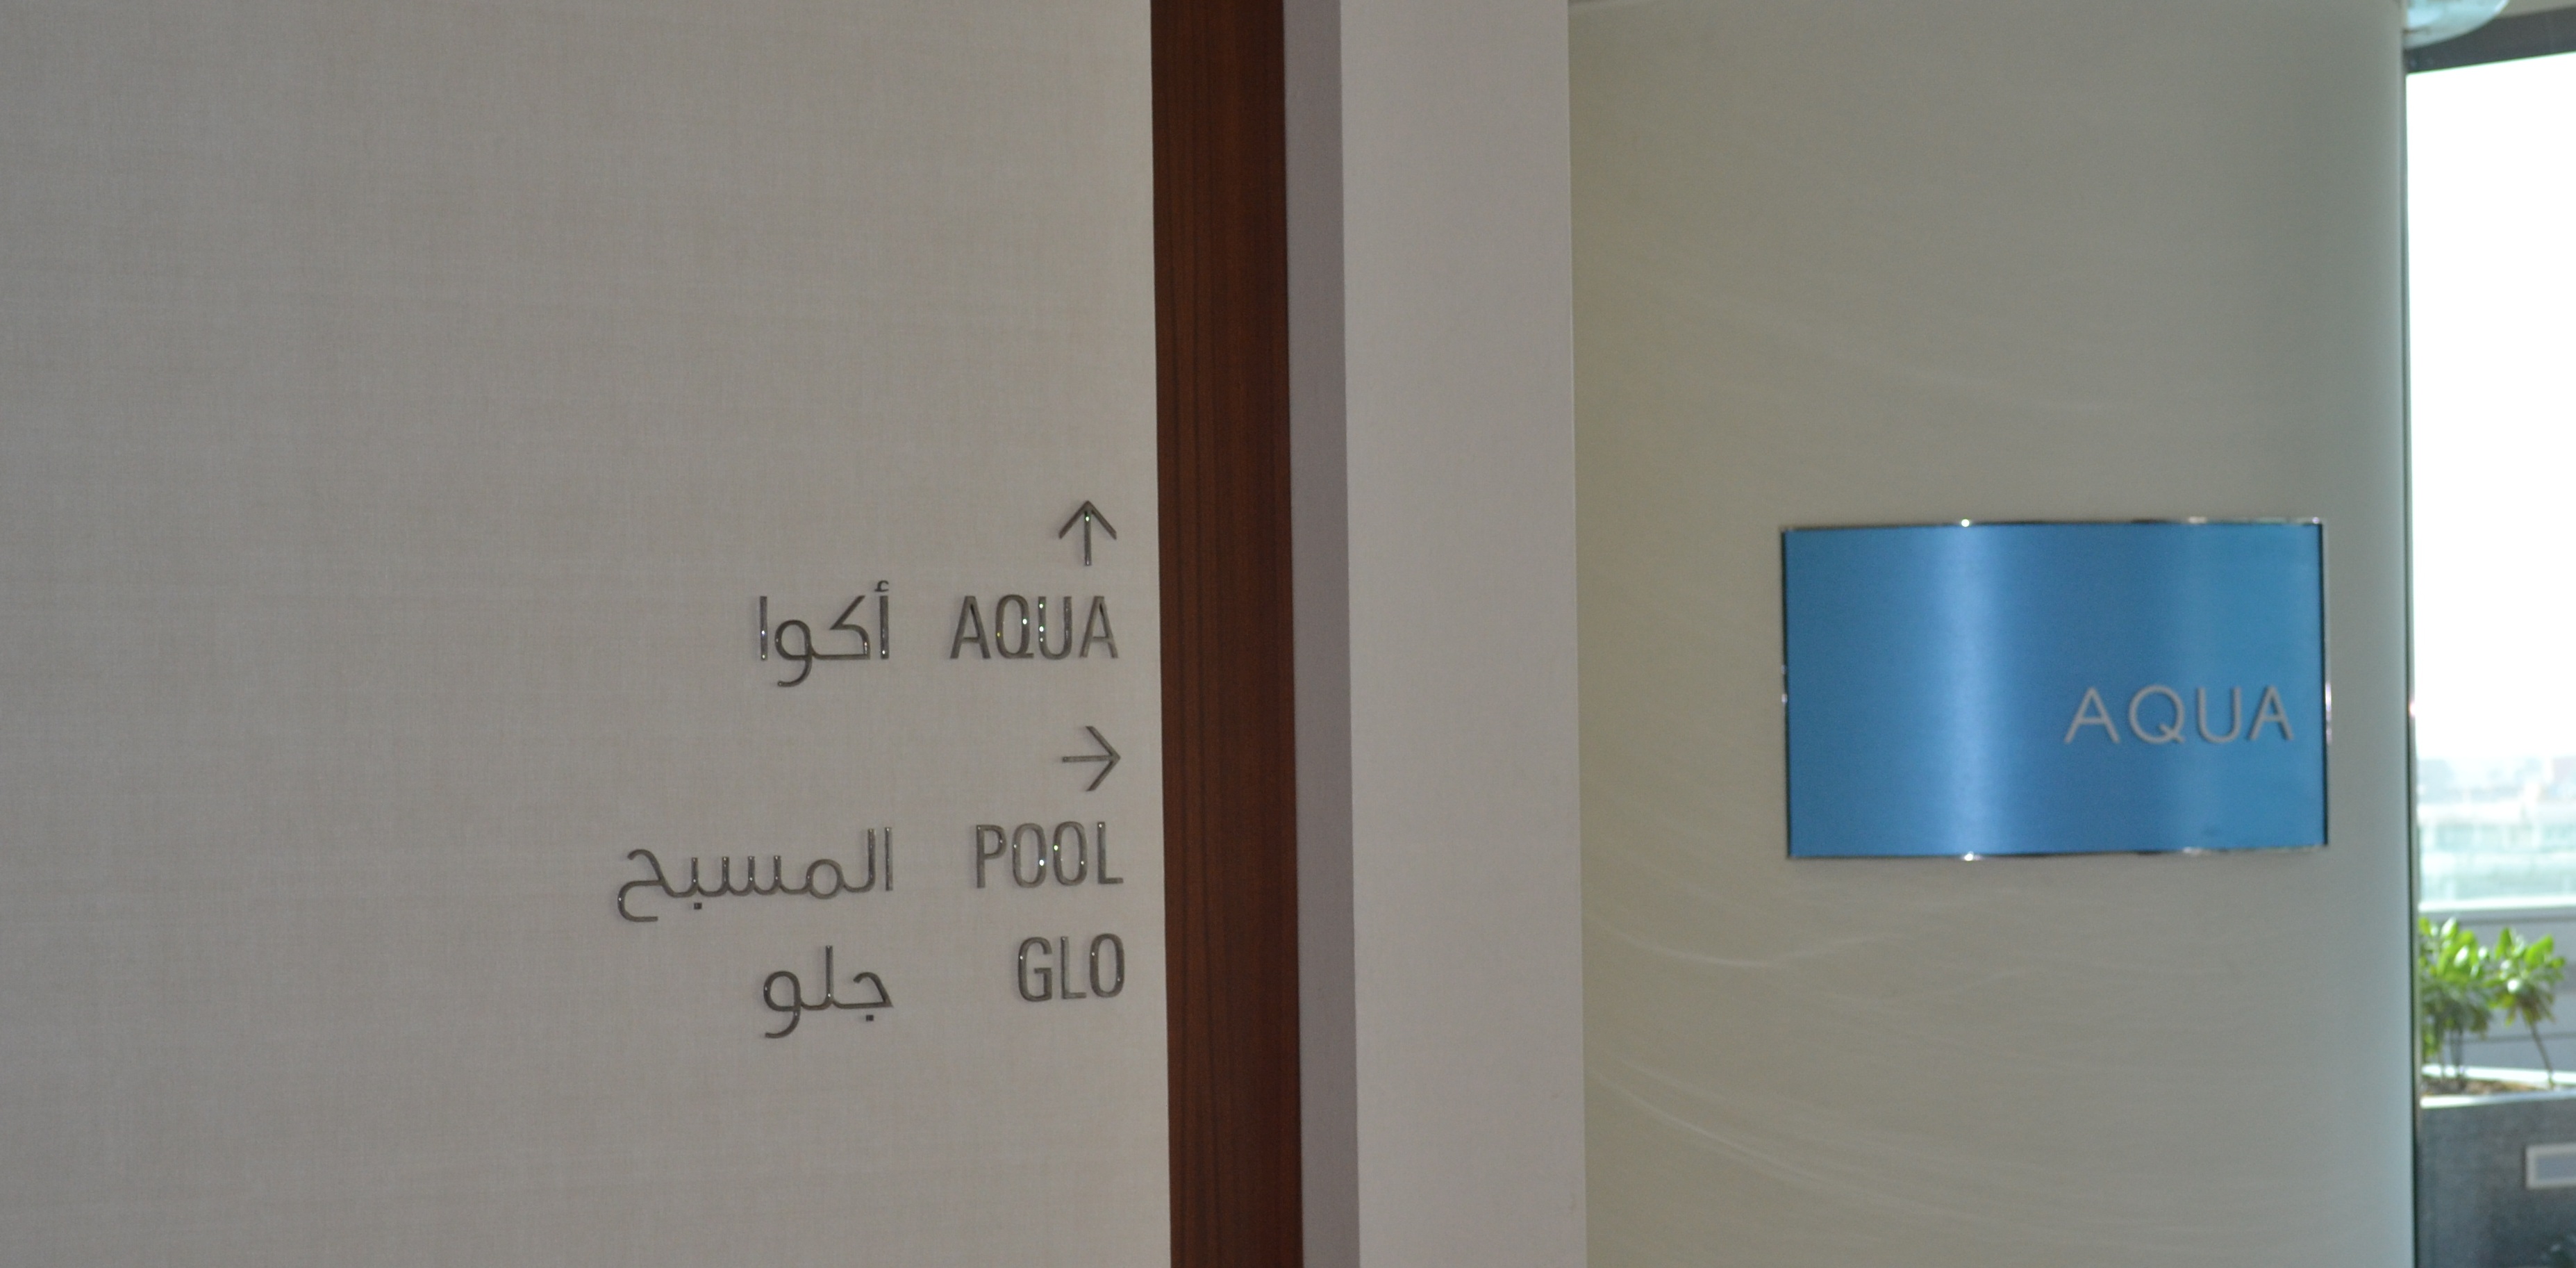 <h2>Rosewood Hotel - Pool Signs</h2><br/>